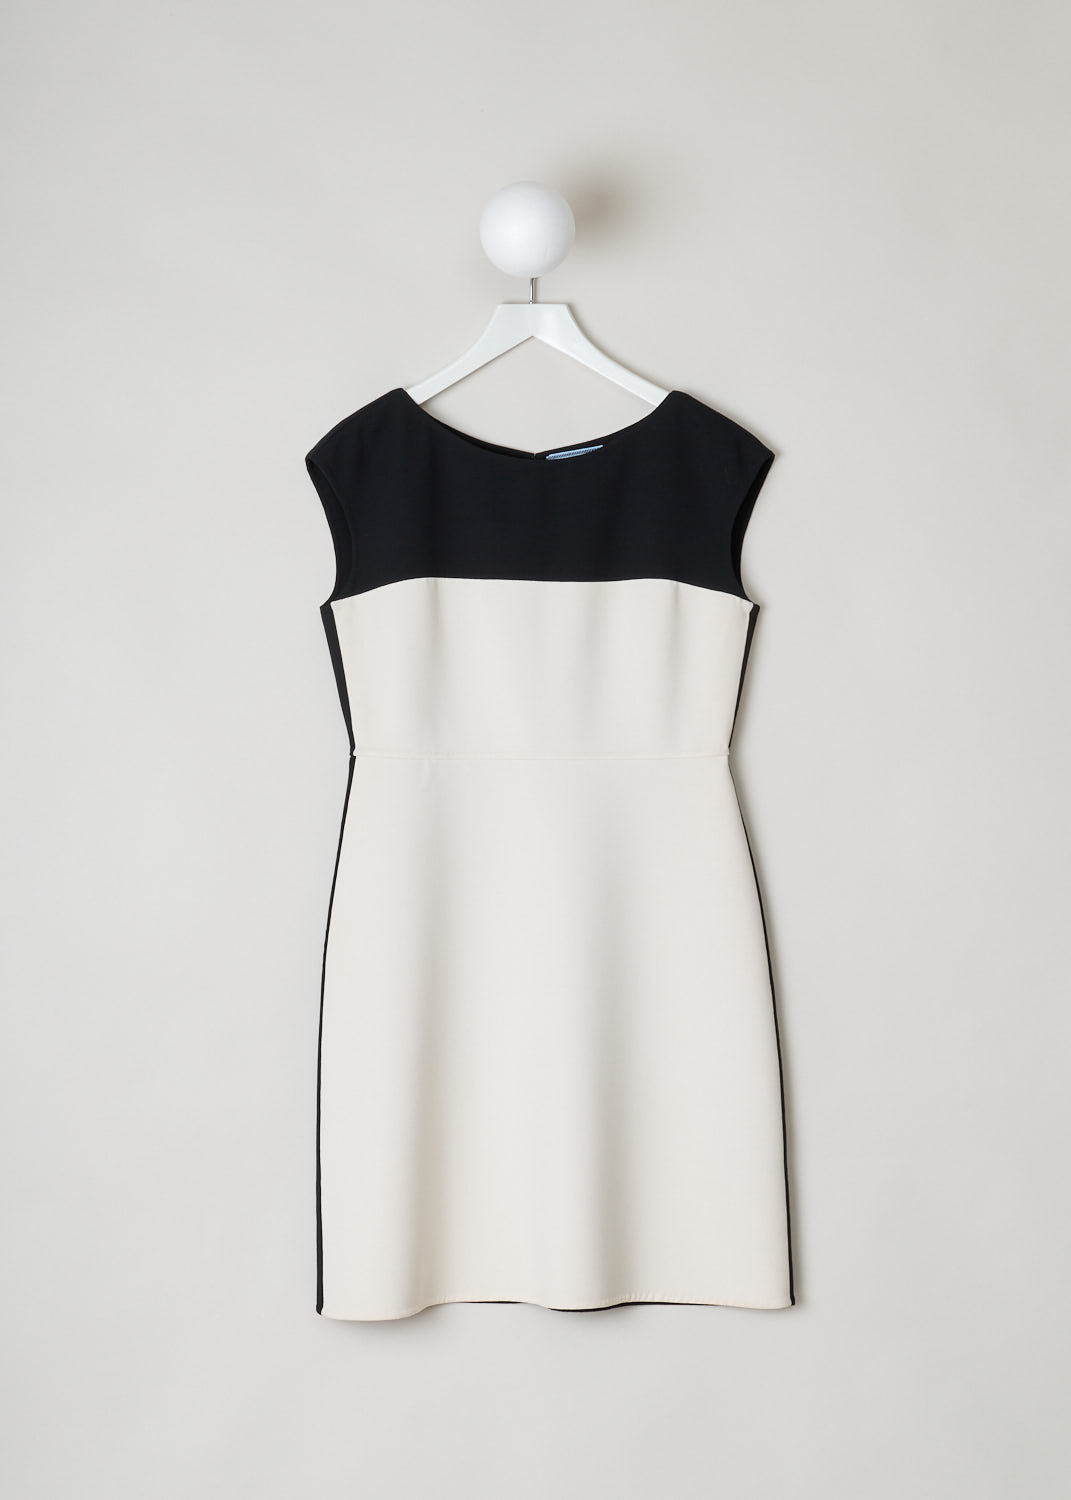 Prada, A-line dress in white with black, natte_double_B_P399T_F0N_nero_talco, black white, front, Midi length black and white A-line dress. Black on the back, and from the chest down white. Featuring a scoop neckline, no sleeves and a concealed zipper on the back. 